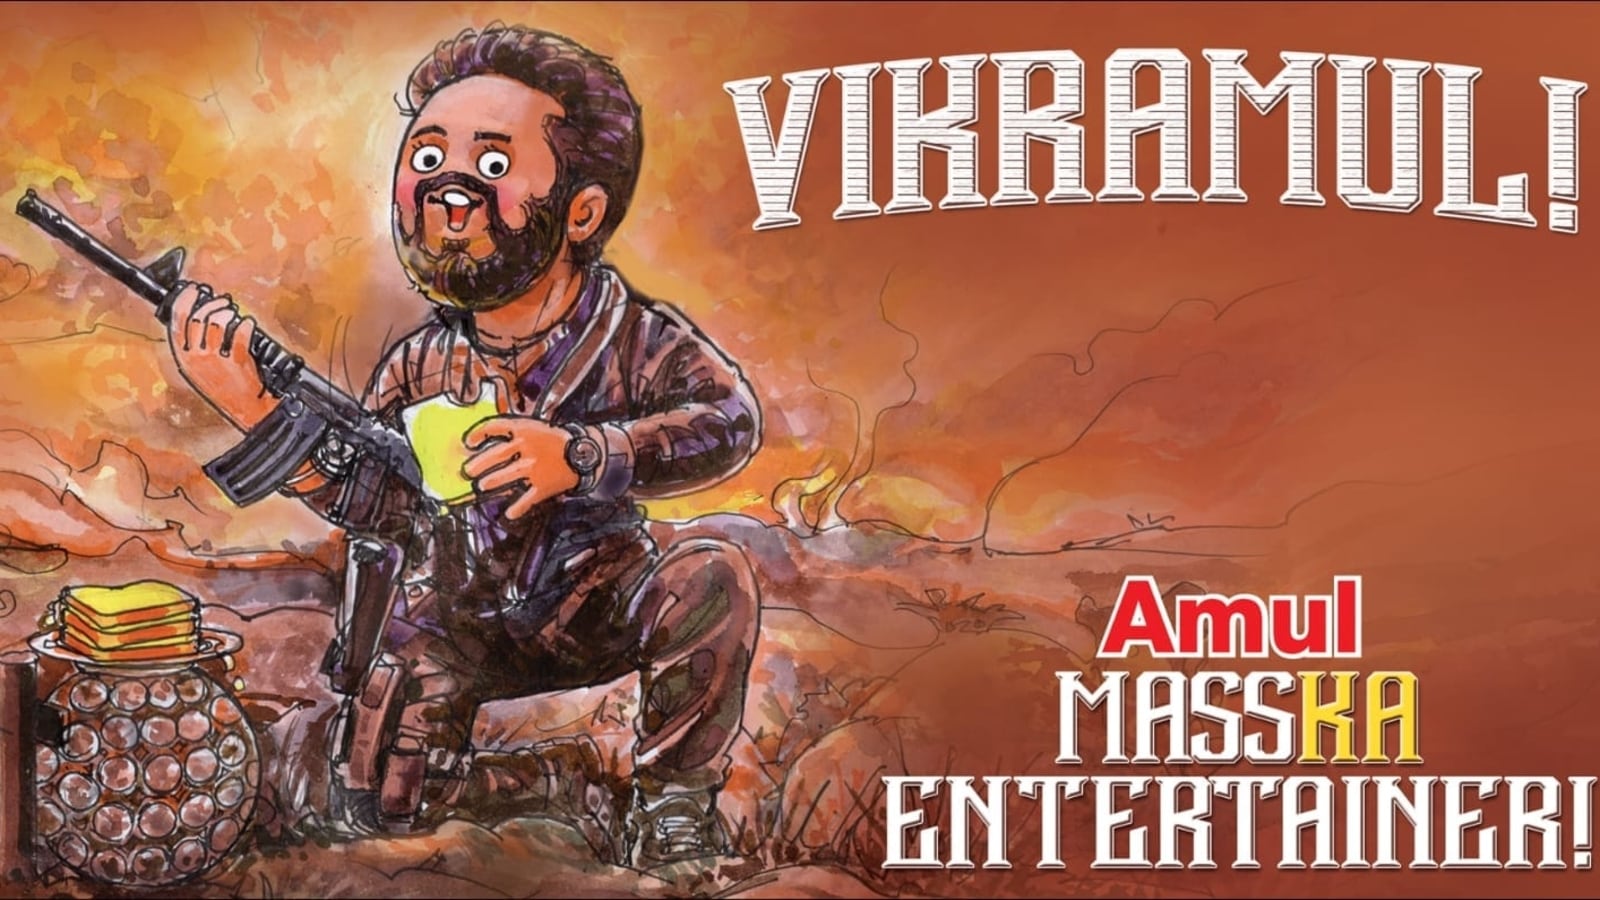 Kamal Haasan-starrer Vikram’s success gets shoutout in Amul topical, fans say ‘good cinema finally being celebrated’